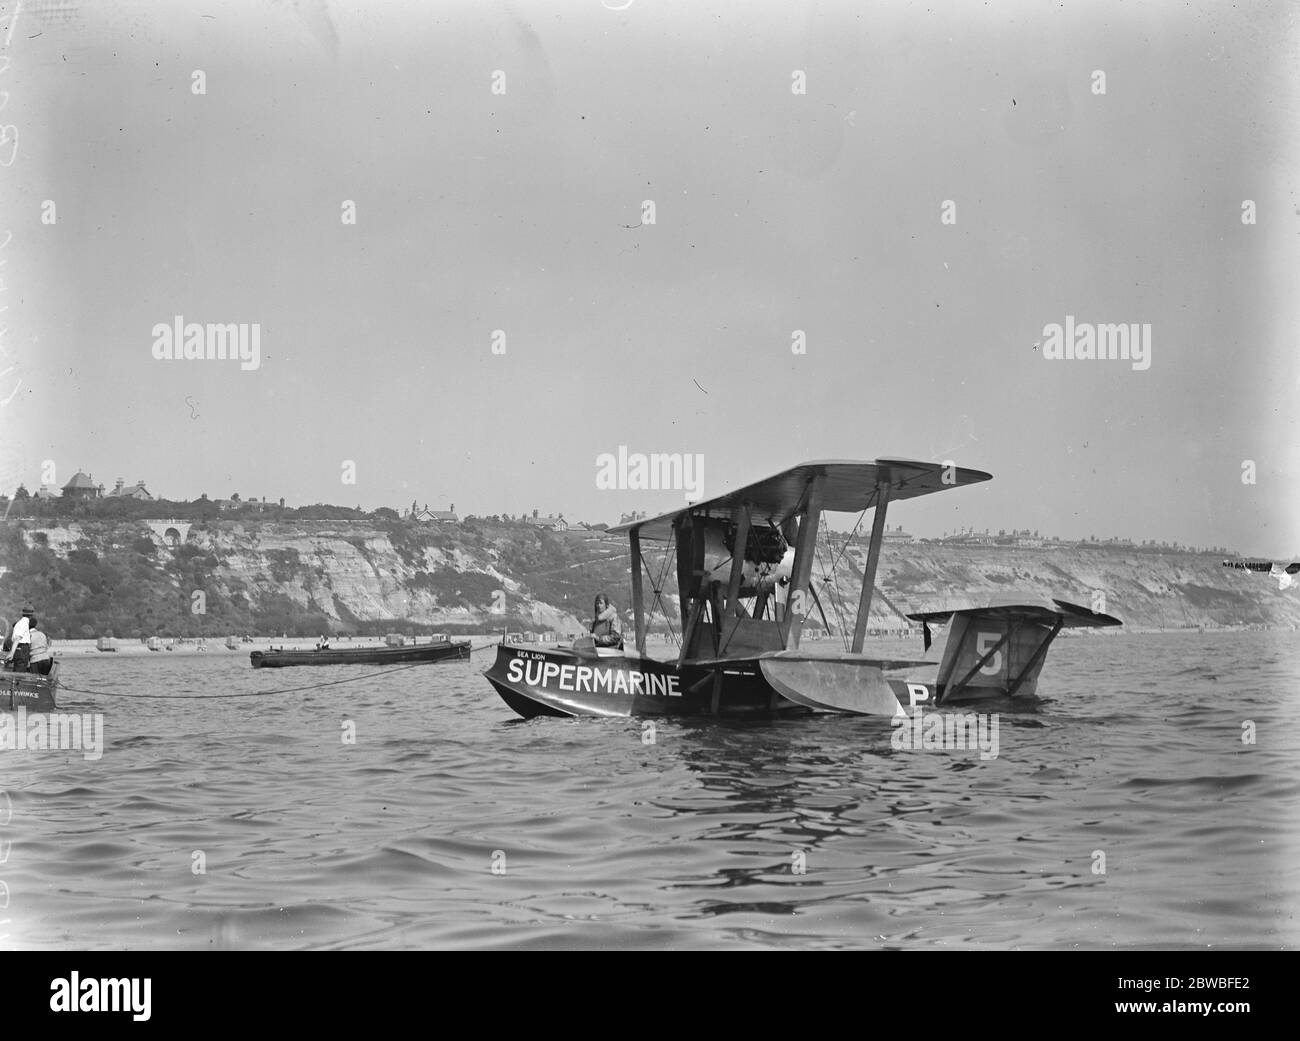 First International Seaplane Race at Bournemouth Squadron Commander B D Hobbs D S O , D F C ( Great Britain ) on a Supermarine seaplane 11 September 1919 Stock Photo